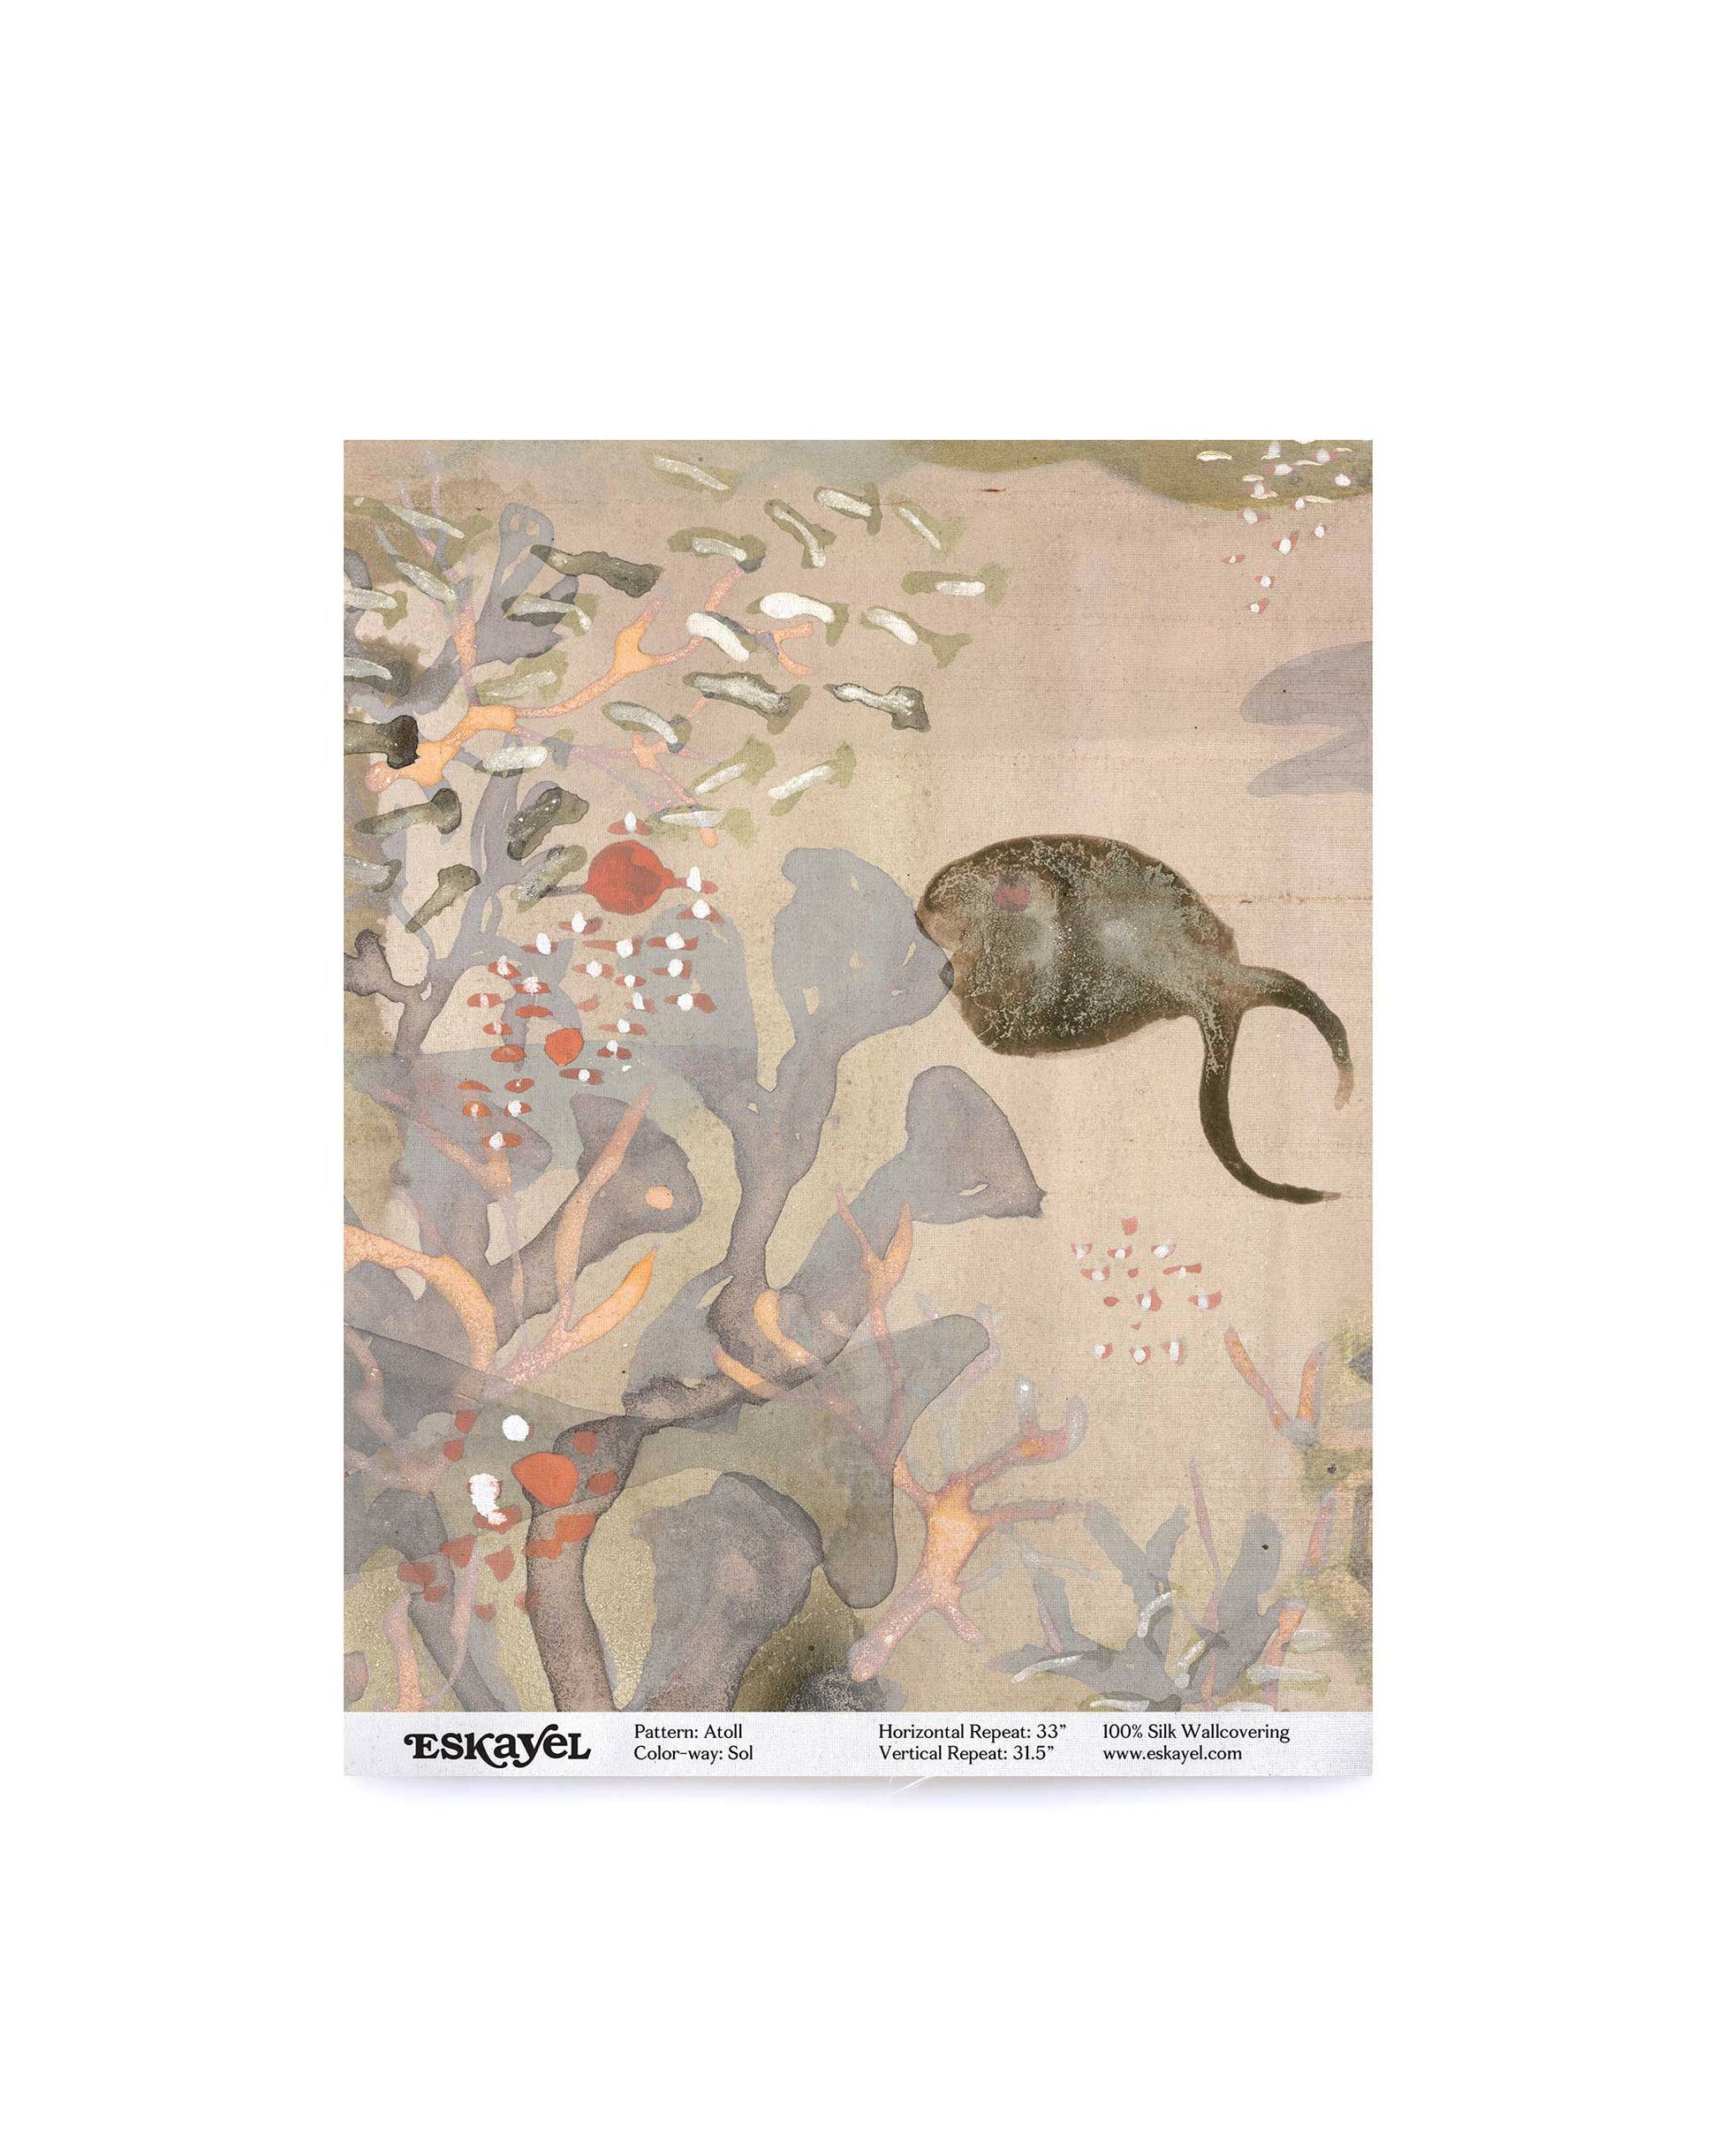 A swatch of Eskayel’s Atoll pattern on paper backed silk wallpaper in the colorway Sol with its beige hues.